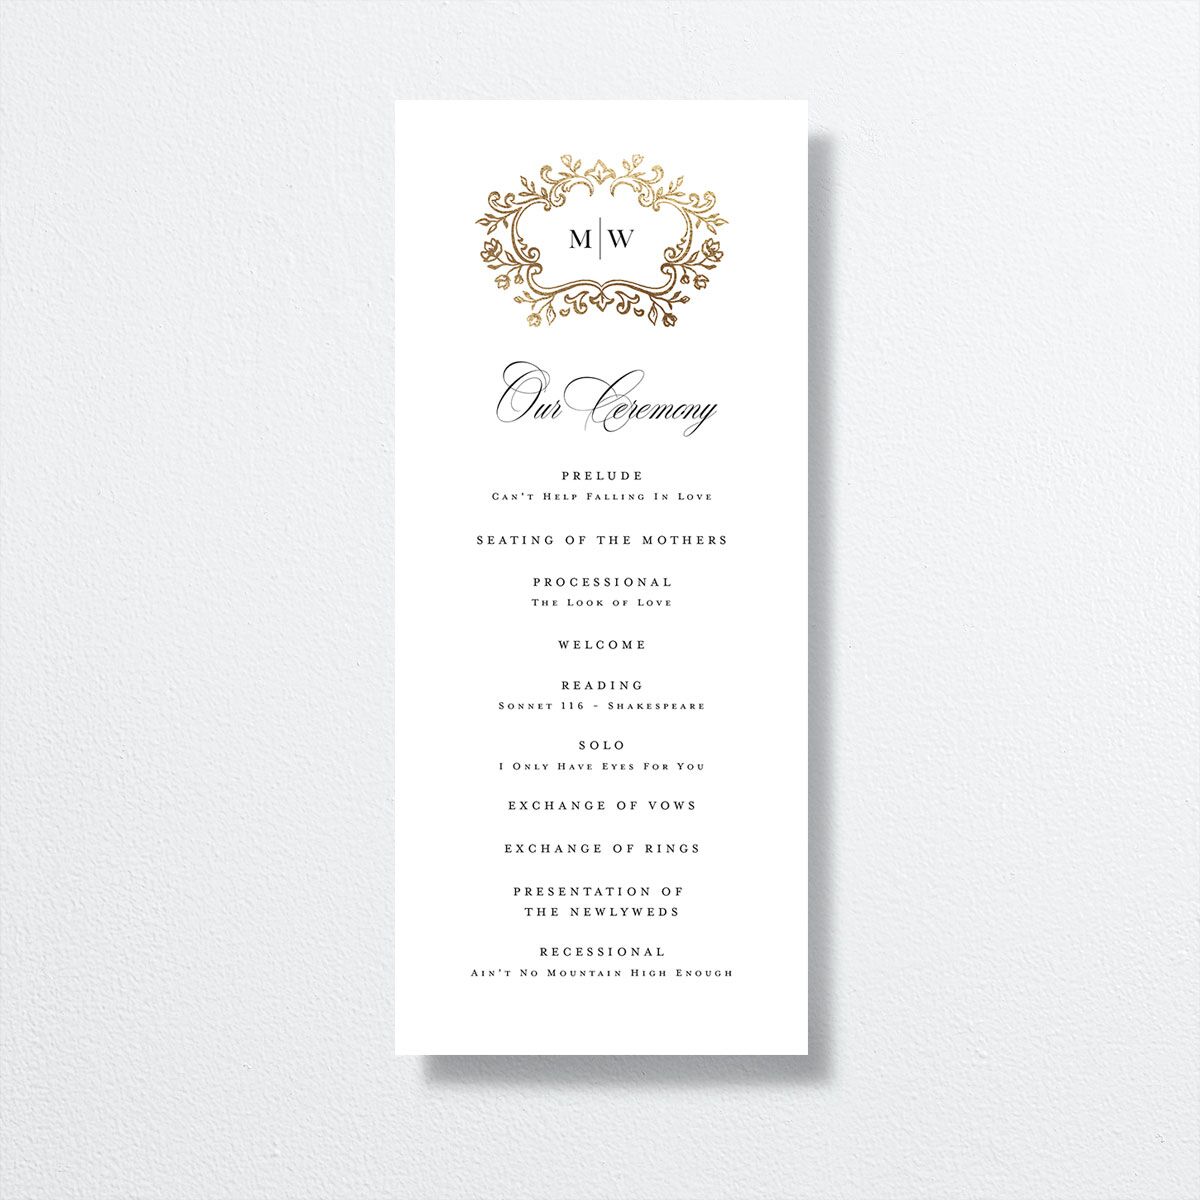 Opulences Wedding Programs by Vera Wang front in white